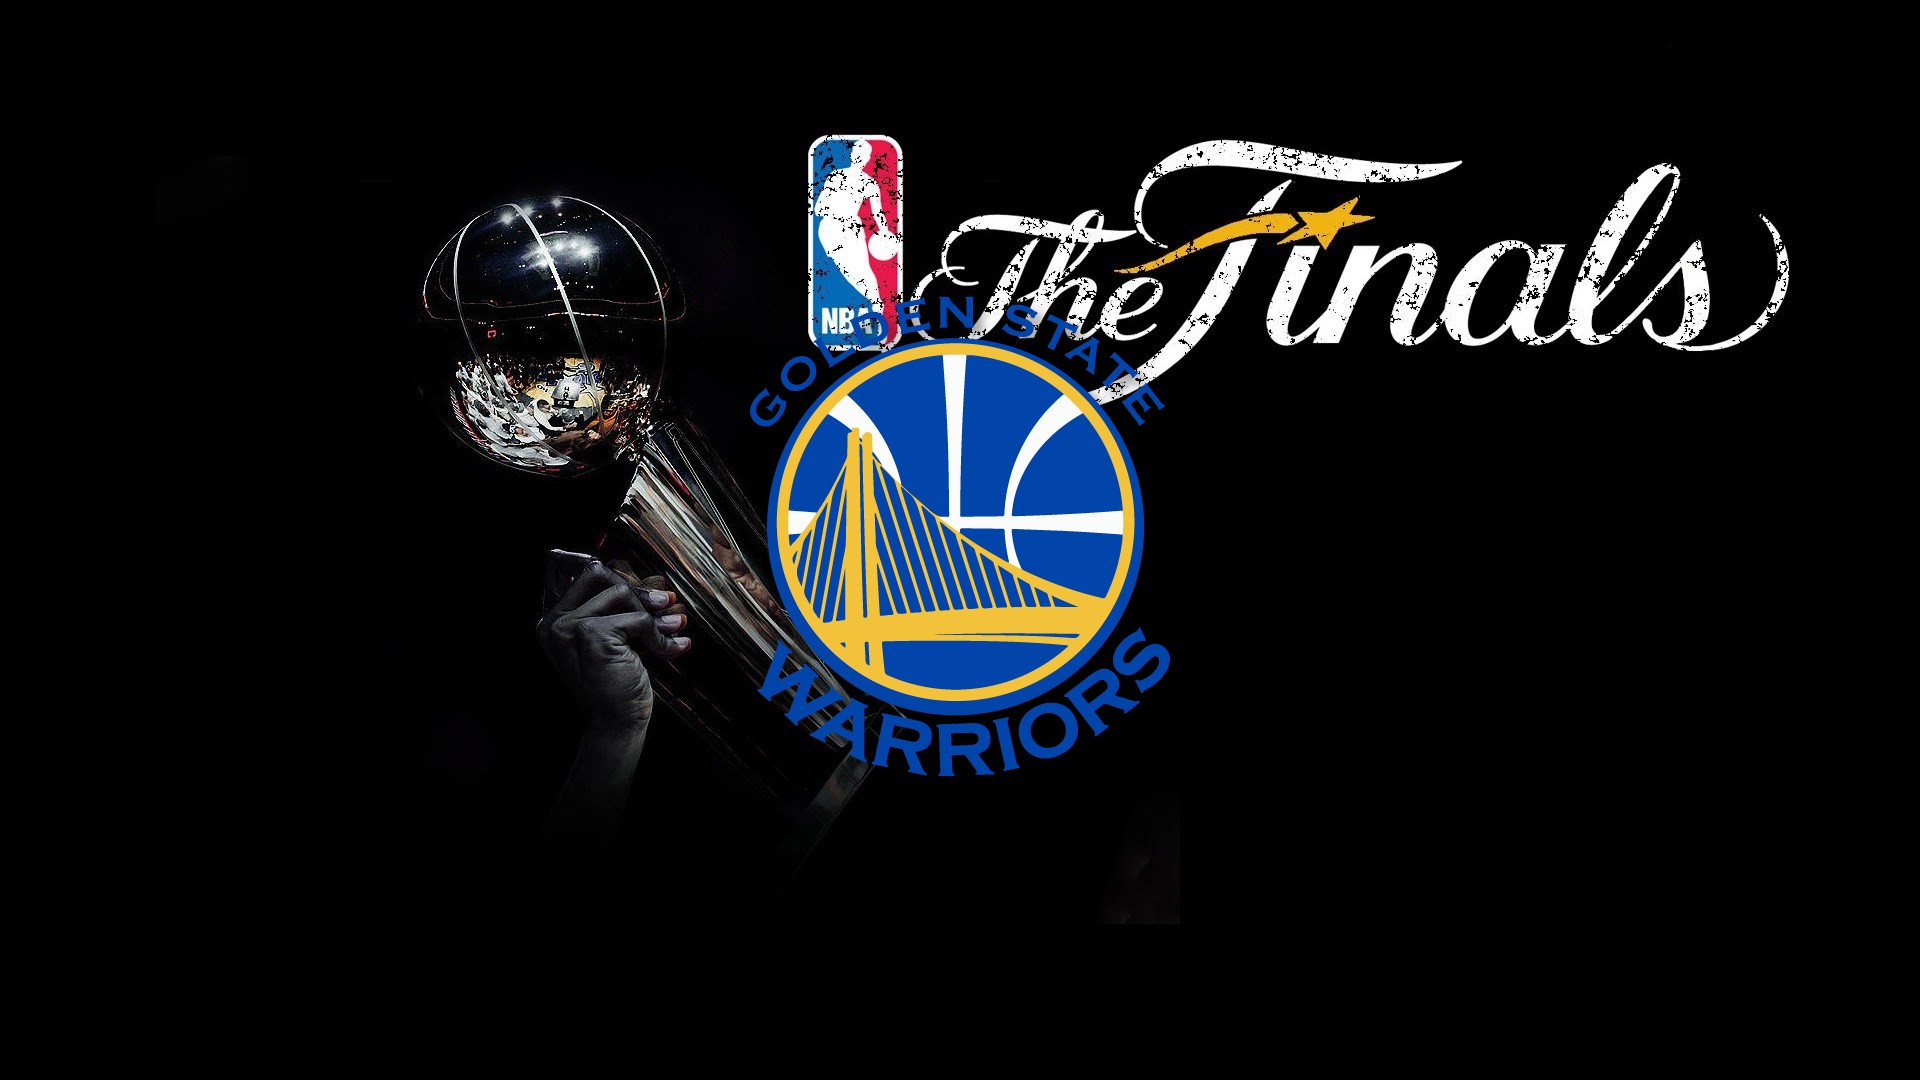 Wallpaper Golden State Warriors Desktop with image resolution 1920x1080 pixel. You can use this wallpaper as background for your desktop Computer Screensavers, Android or iPhone smartphones